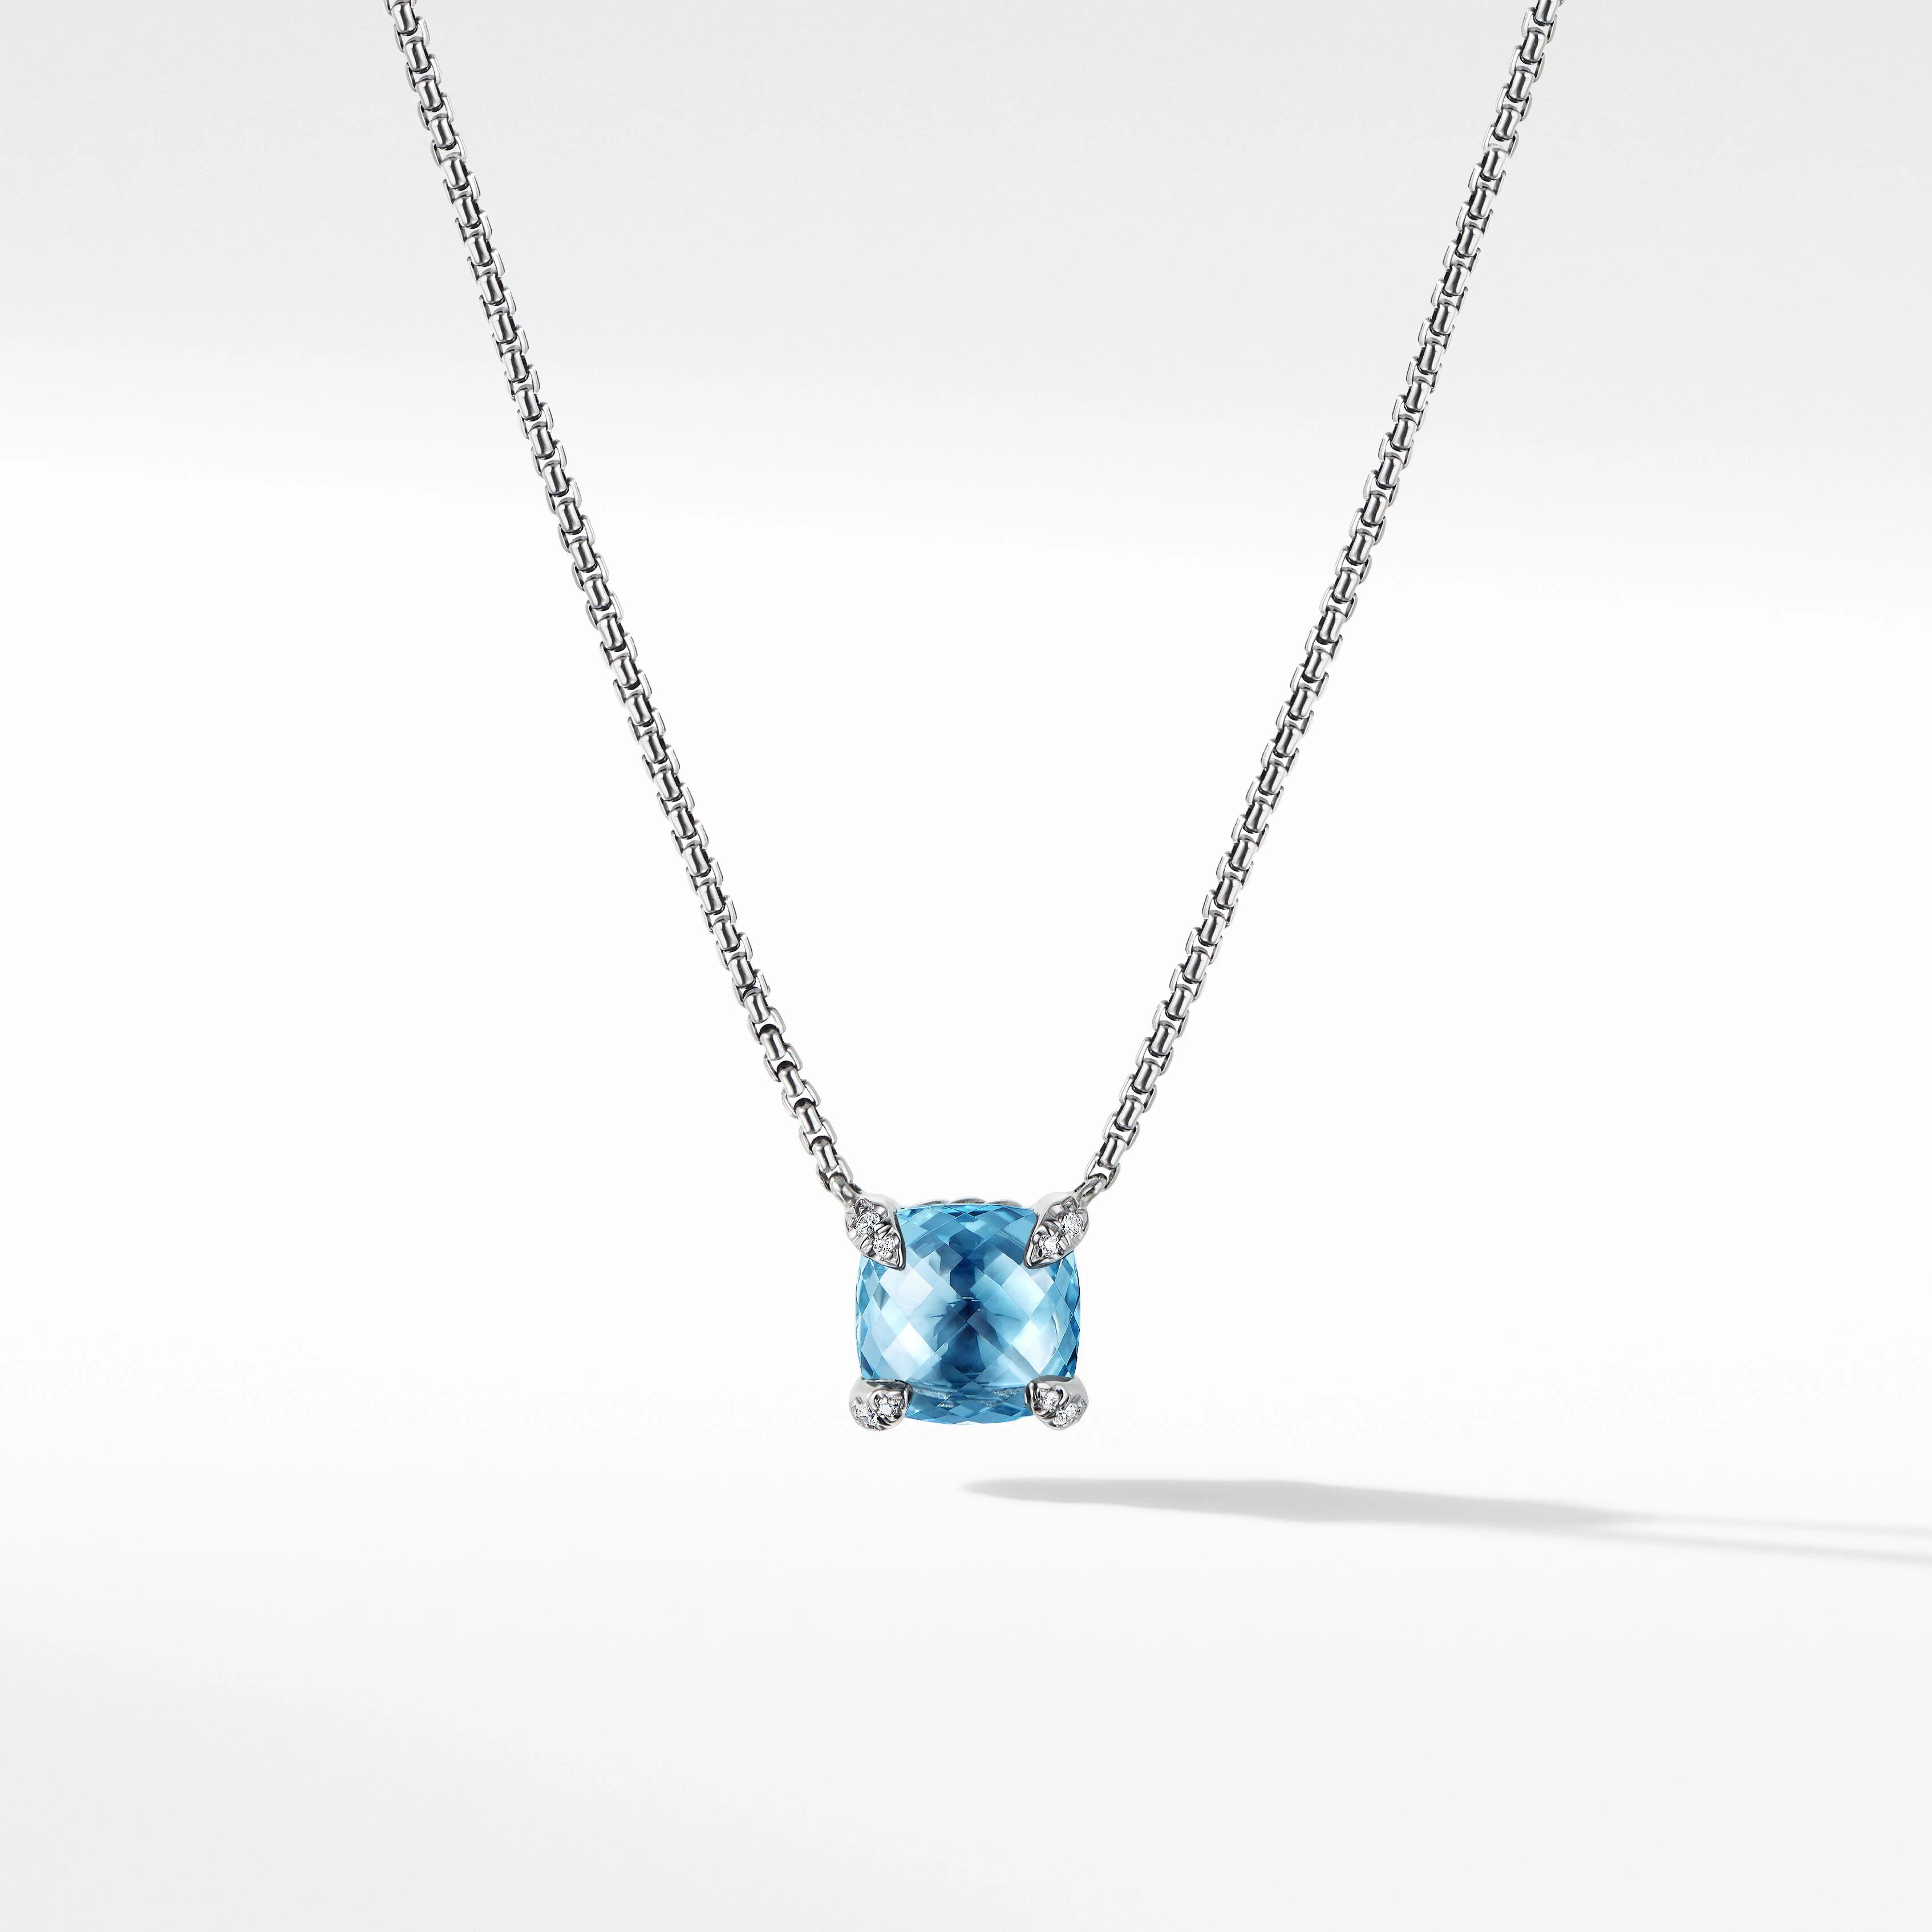 Petite Chatelaine® Pendant Necklace in Sterling Silver with Blue Topaz and Pavé Diamonds | David Yurman